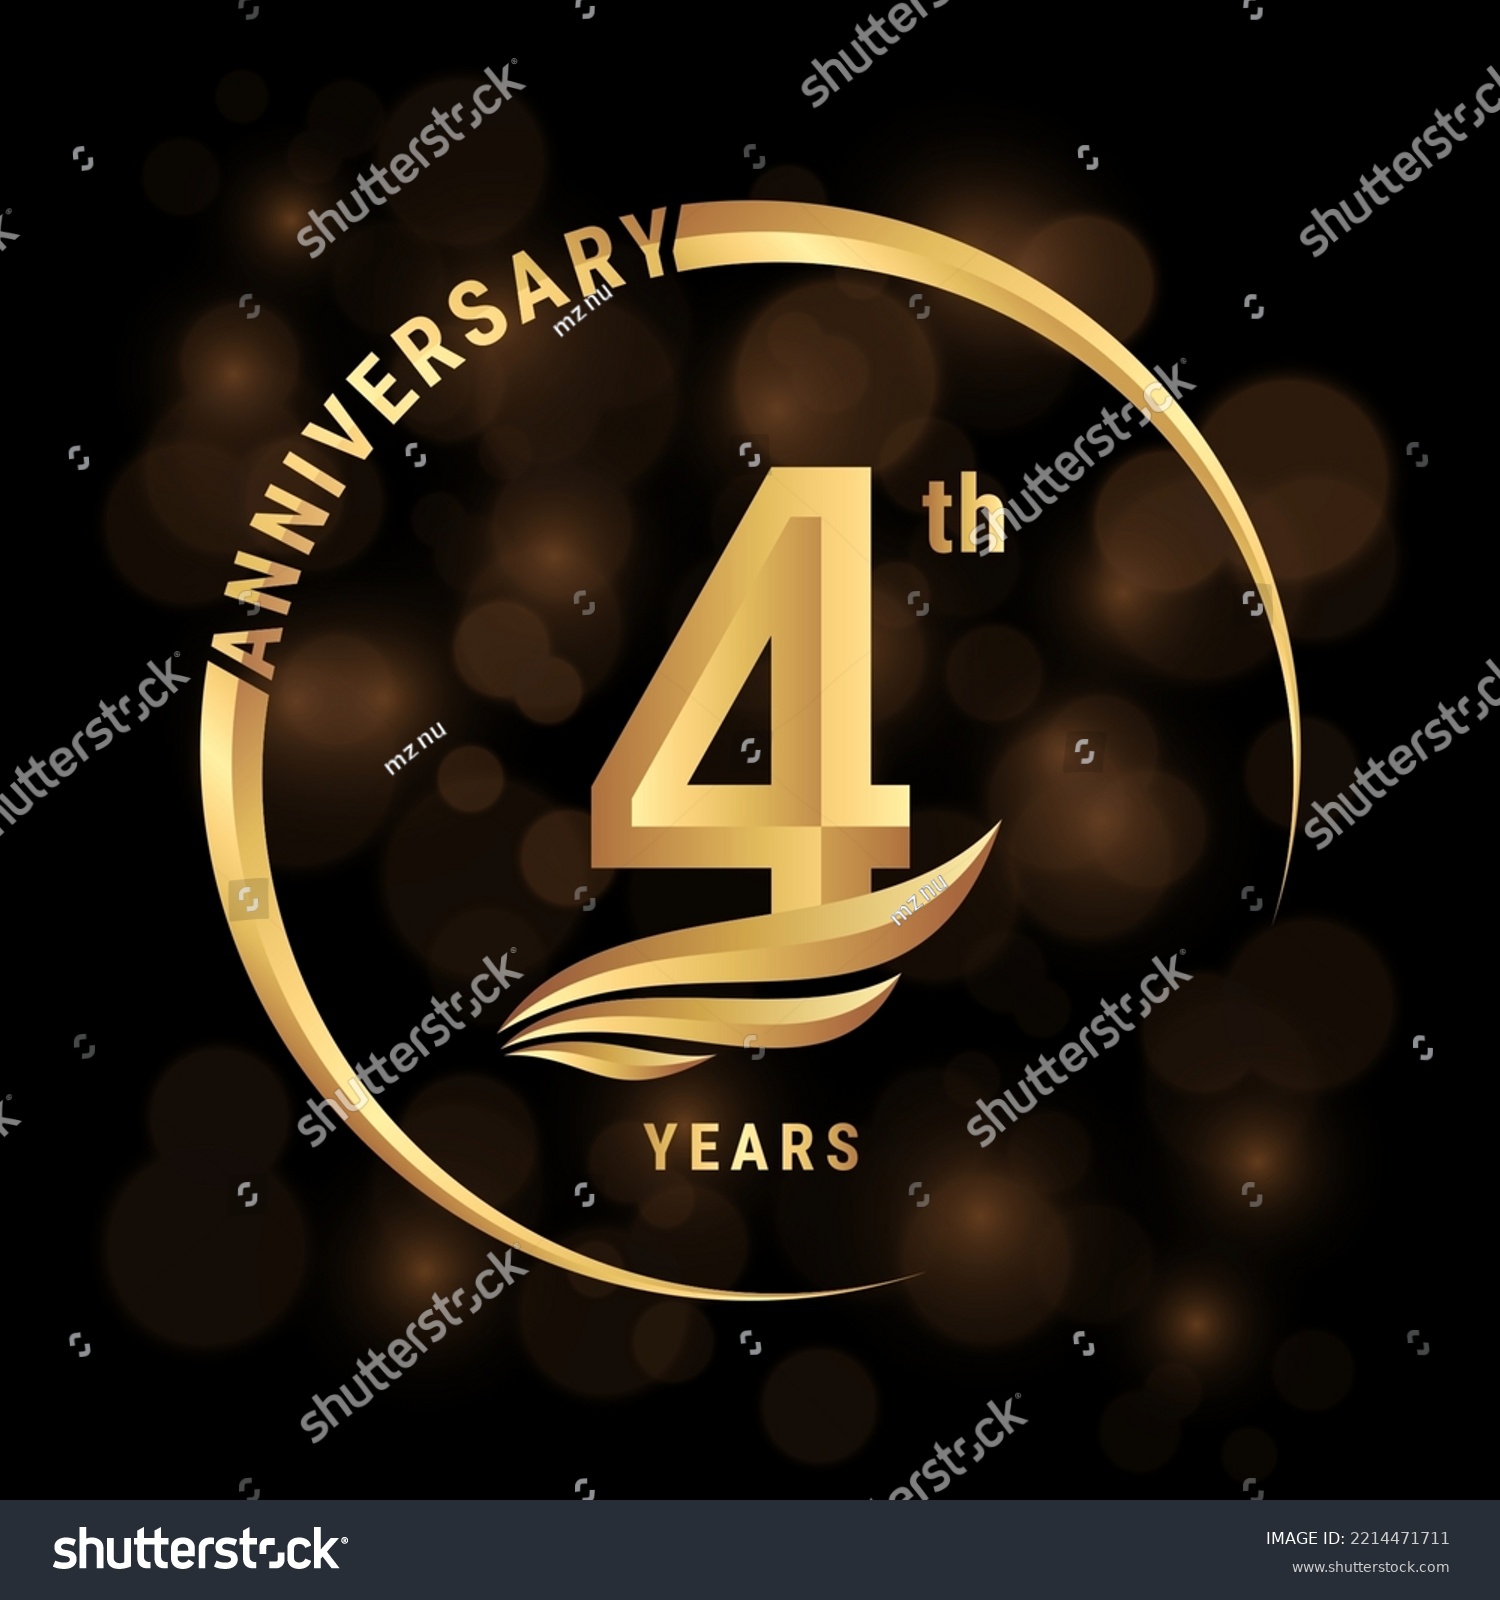 SVG of 4th Anniversary Logo, Logo design with gold color wings for poster, banner, brochure, magazine, web, booklet, invitation or greeting card. Vector illustration svg